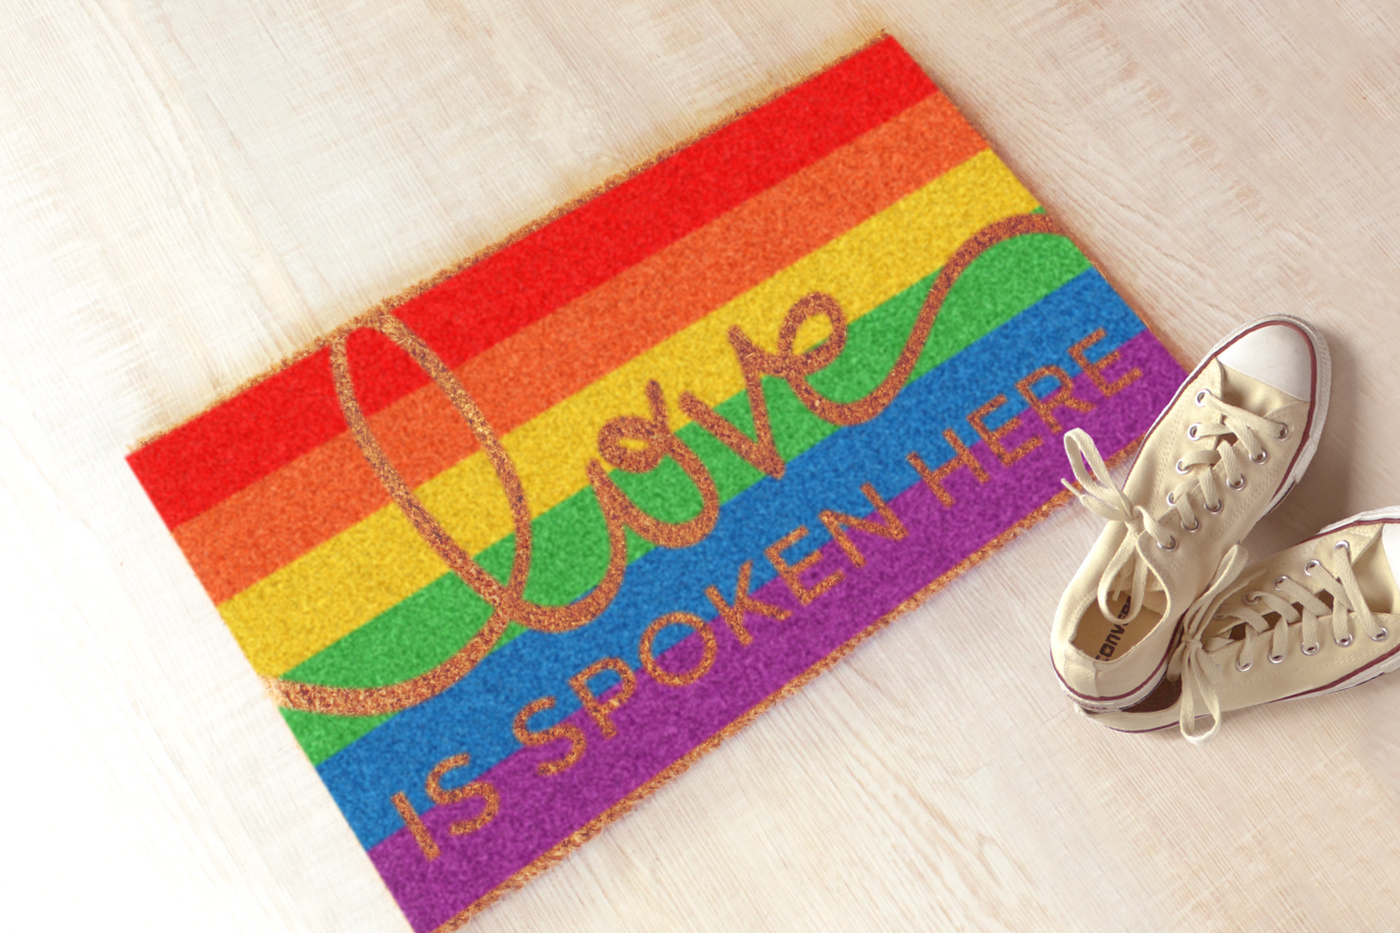 Doormat with rainbow stripes. Knocked out of the stripes is the phrase "love is spoken here."